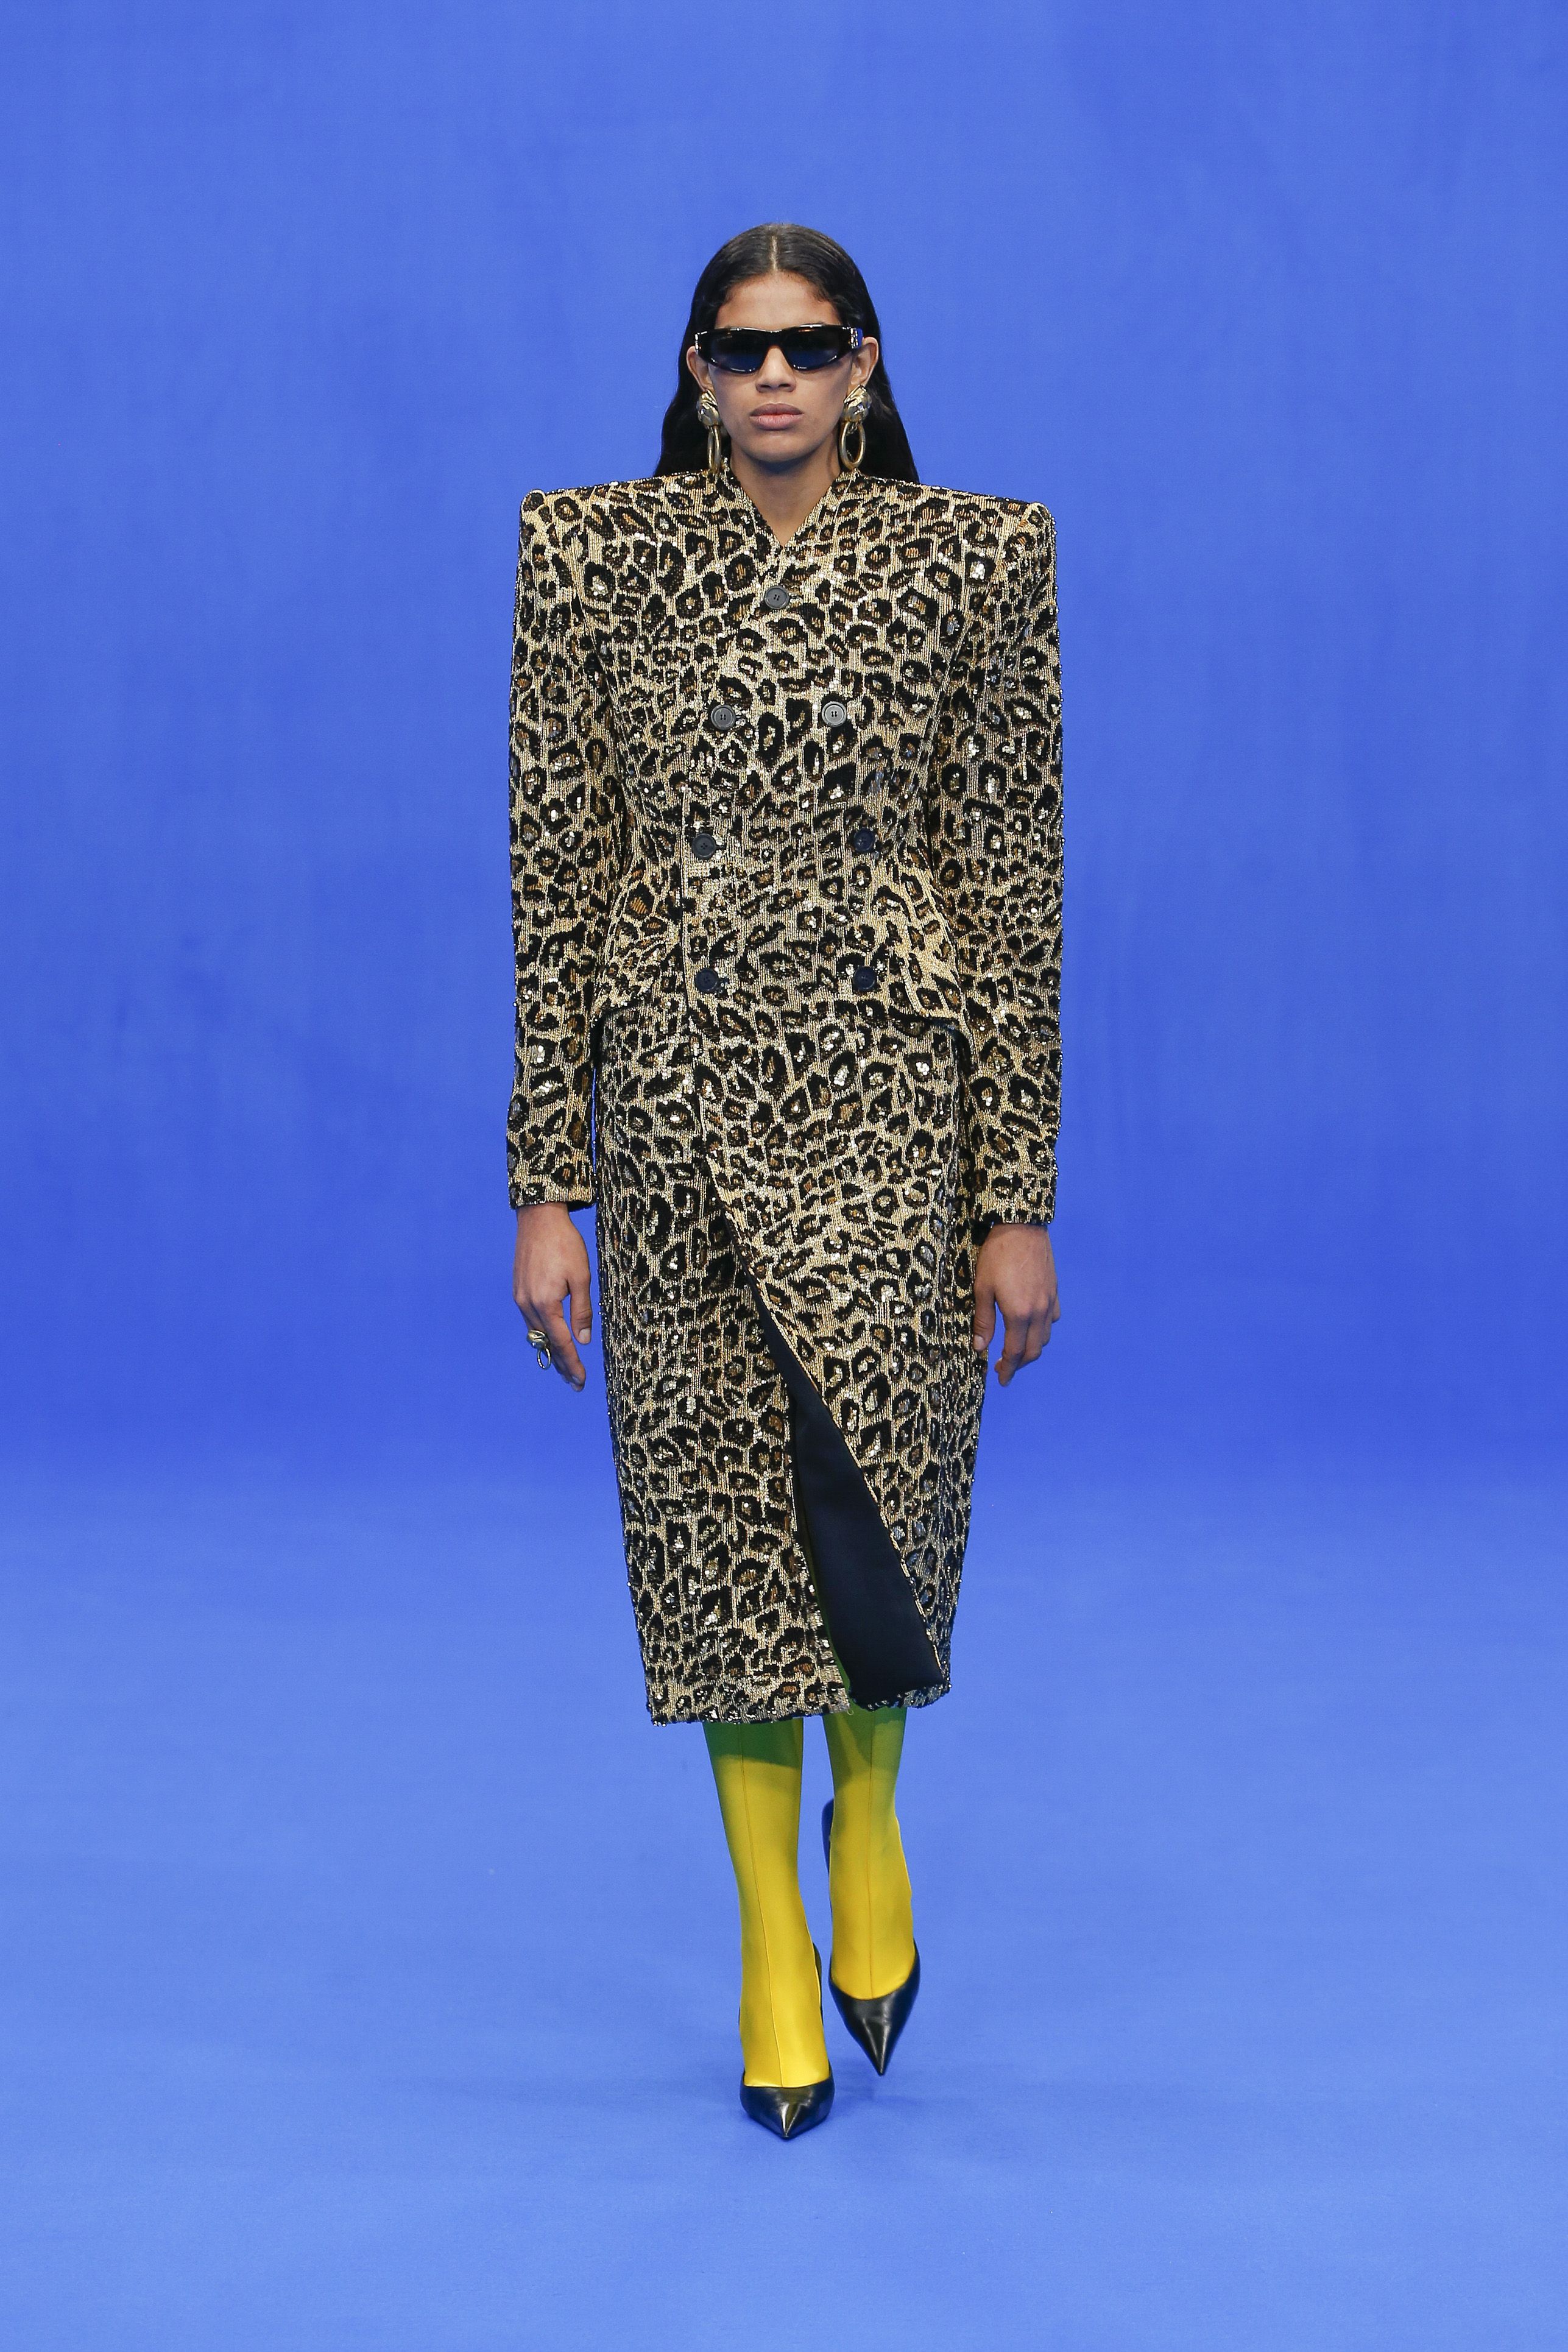 Animal Print: Why The Trend Will Be Chic